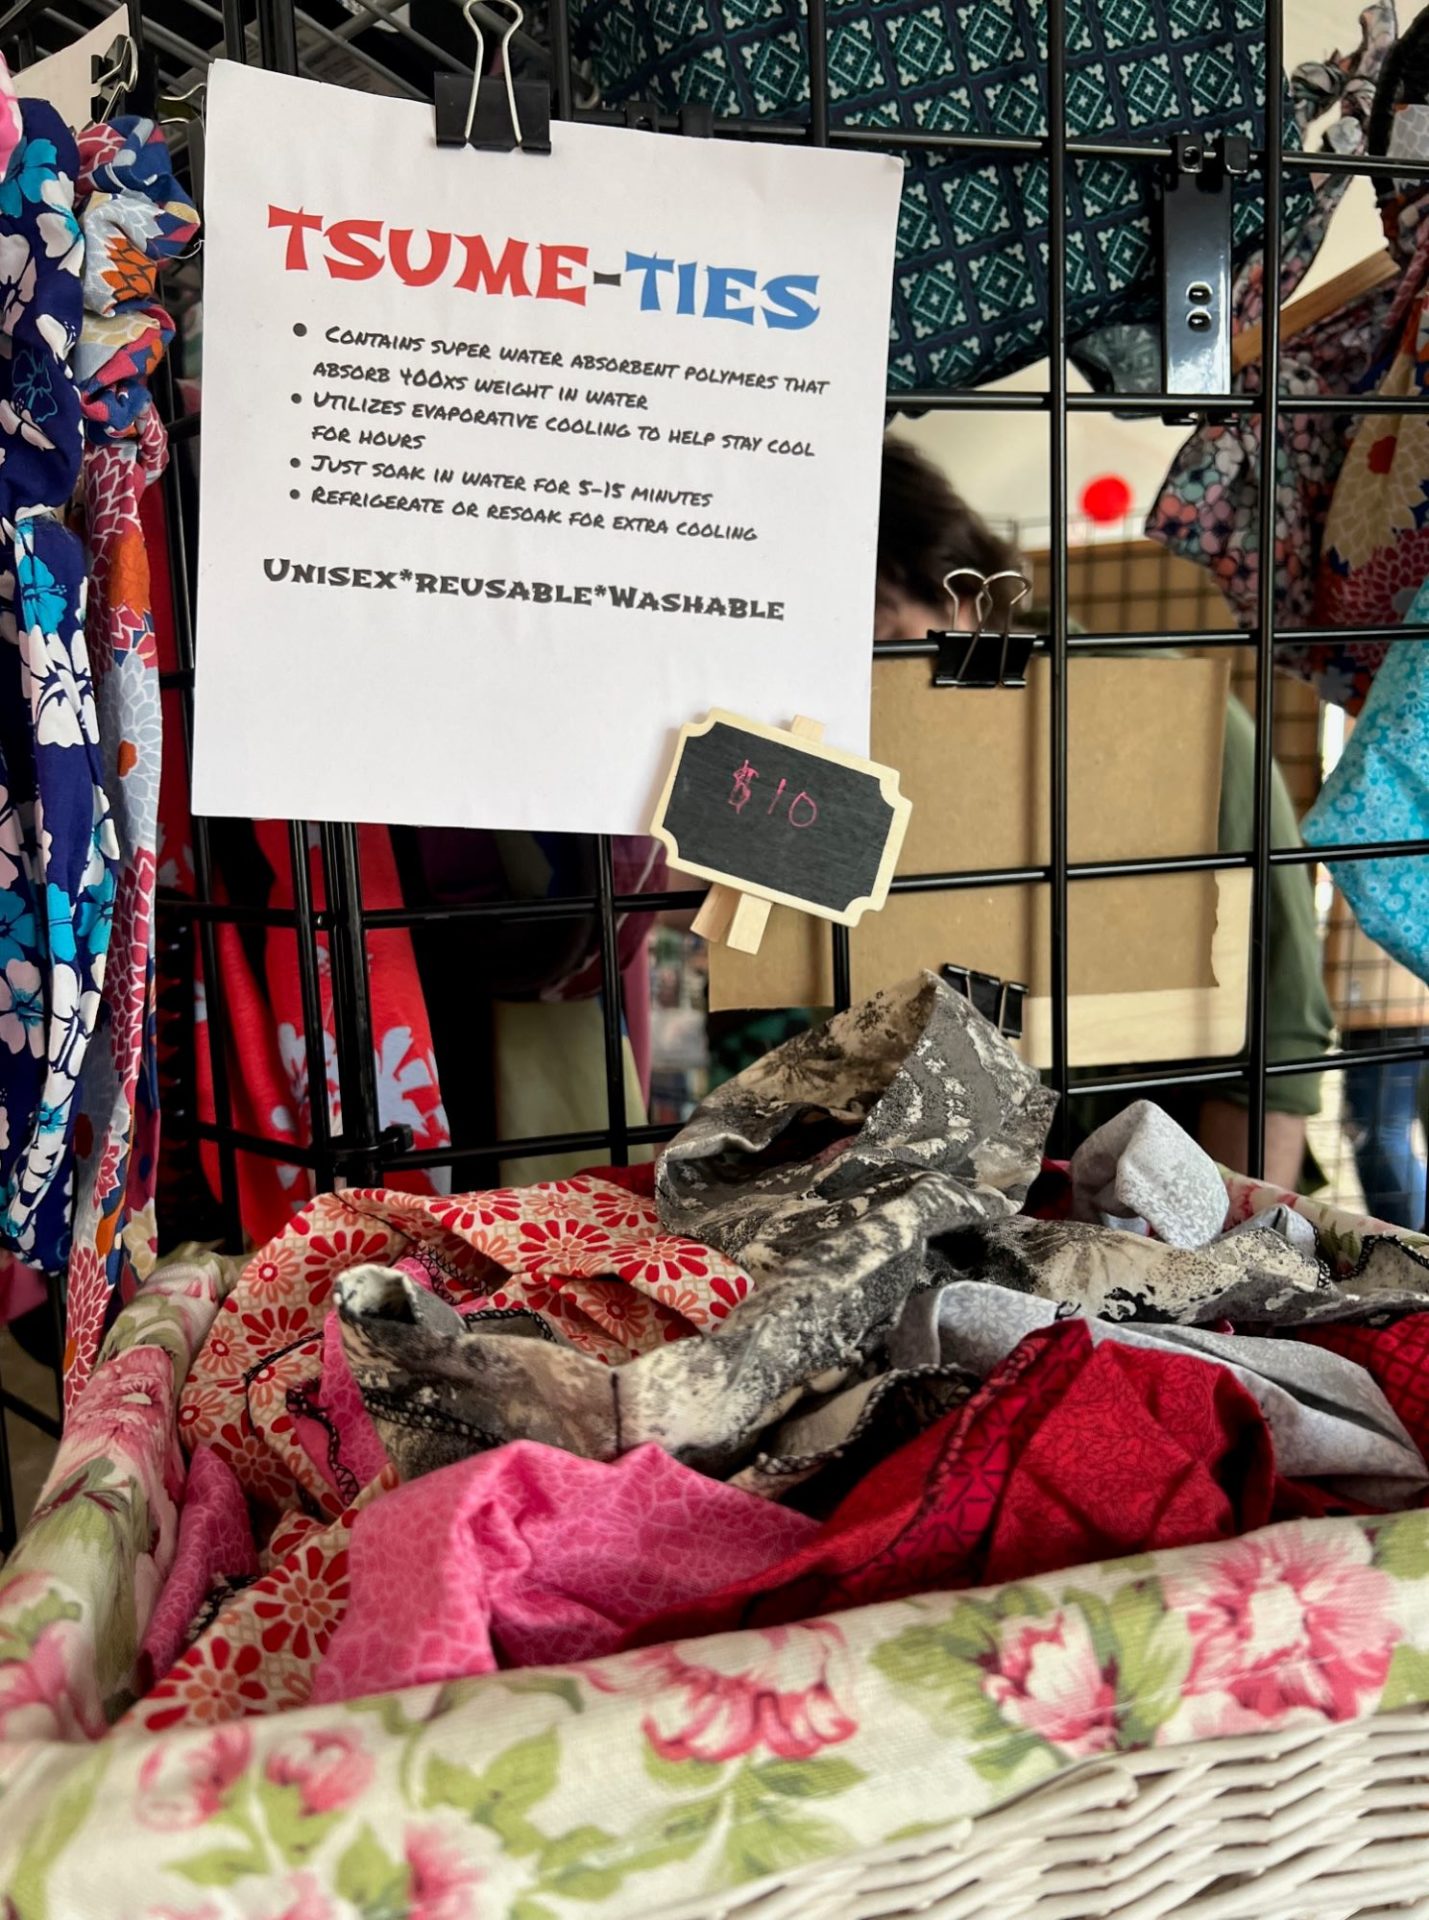 A basket of colorful patterned pieces of fabric sit on a shelf, below a white sheet of paper that says Tsume-Ties in red and blue lettering.